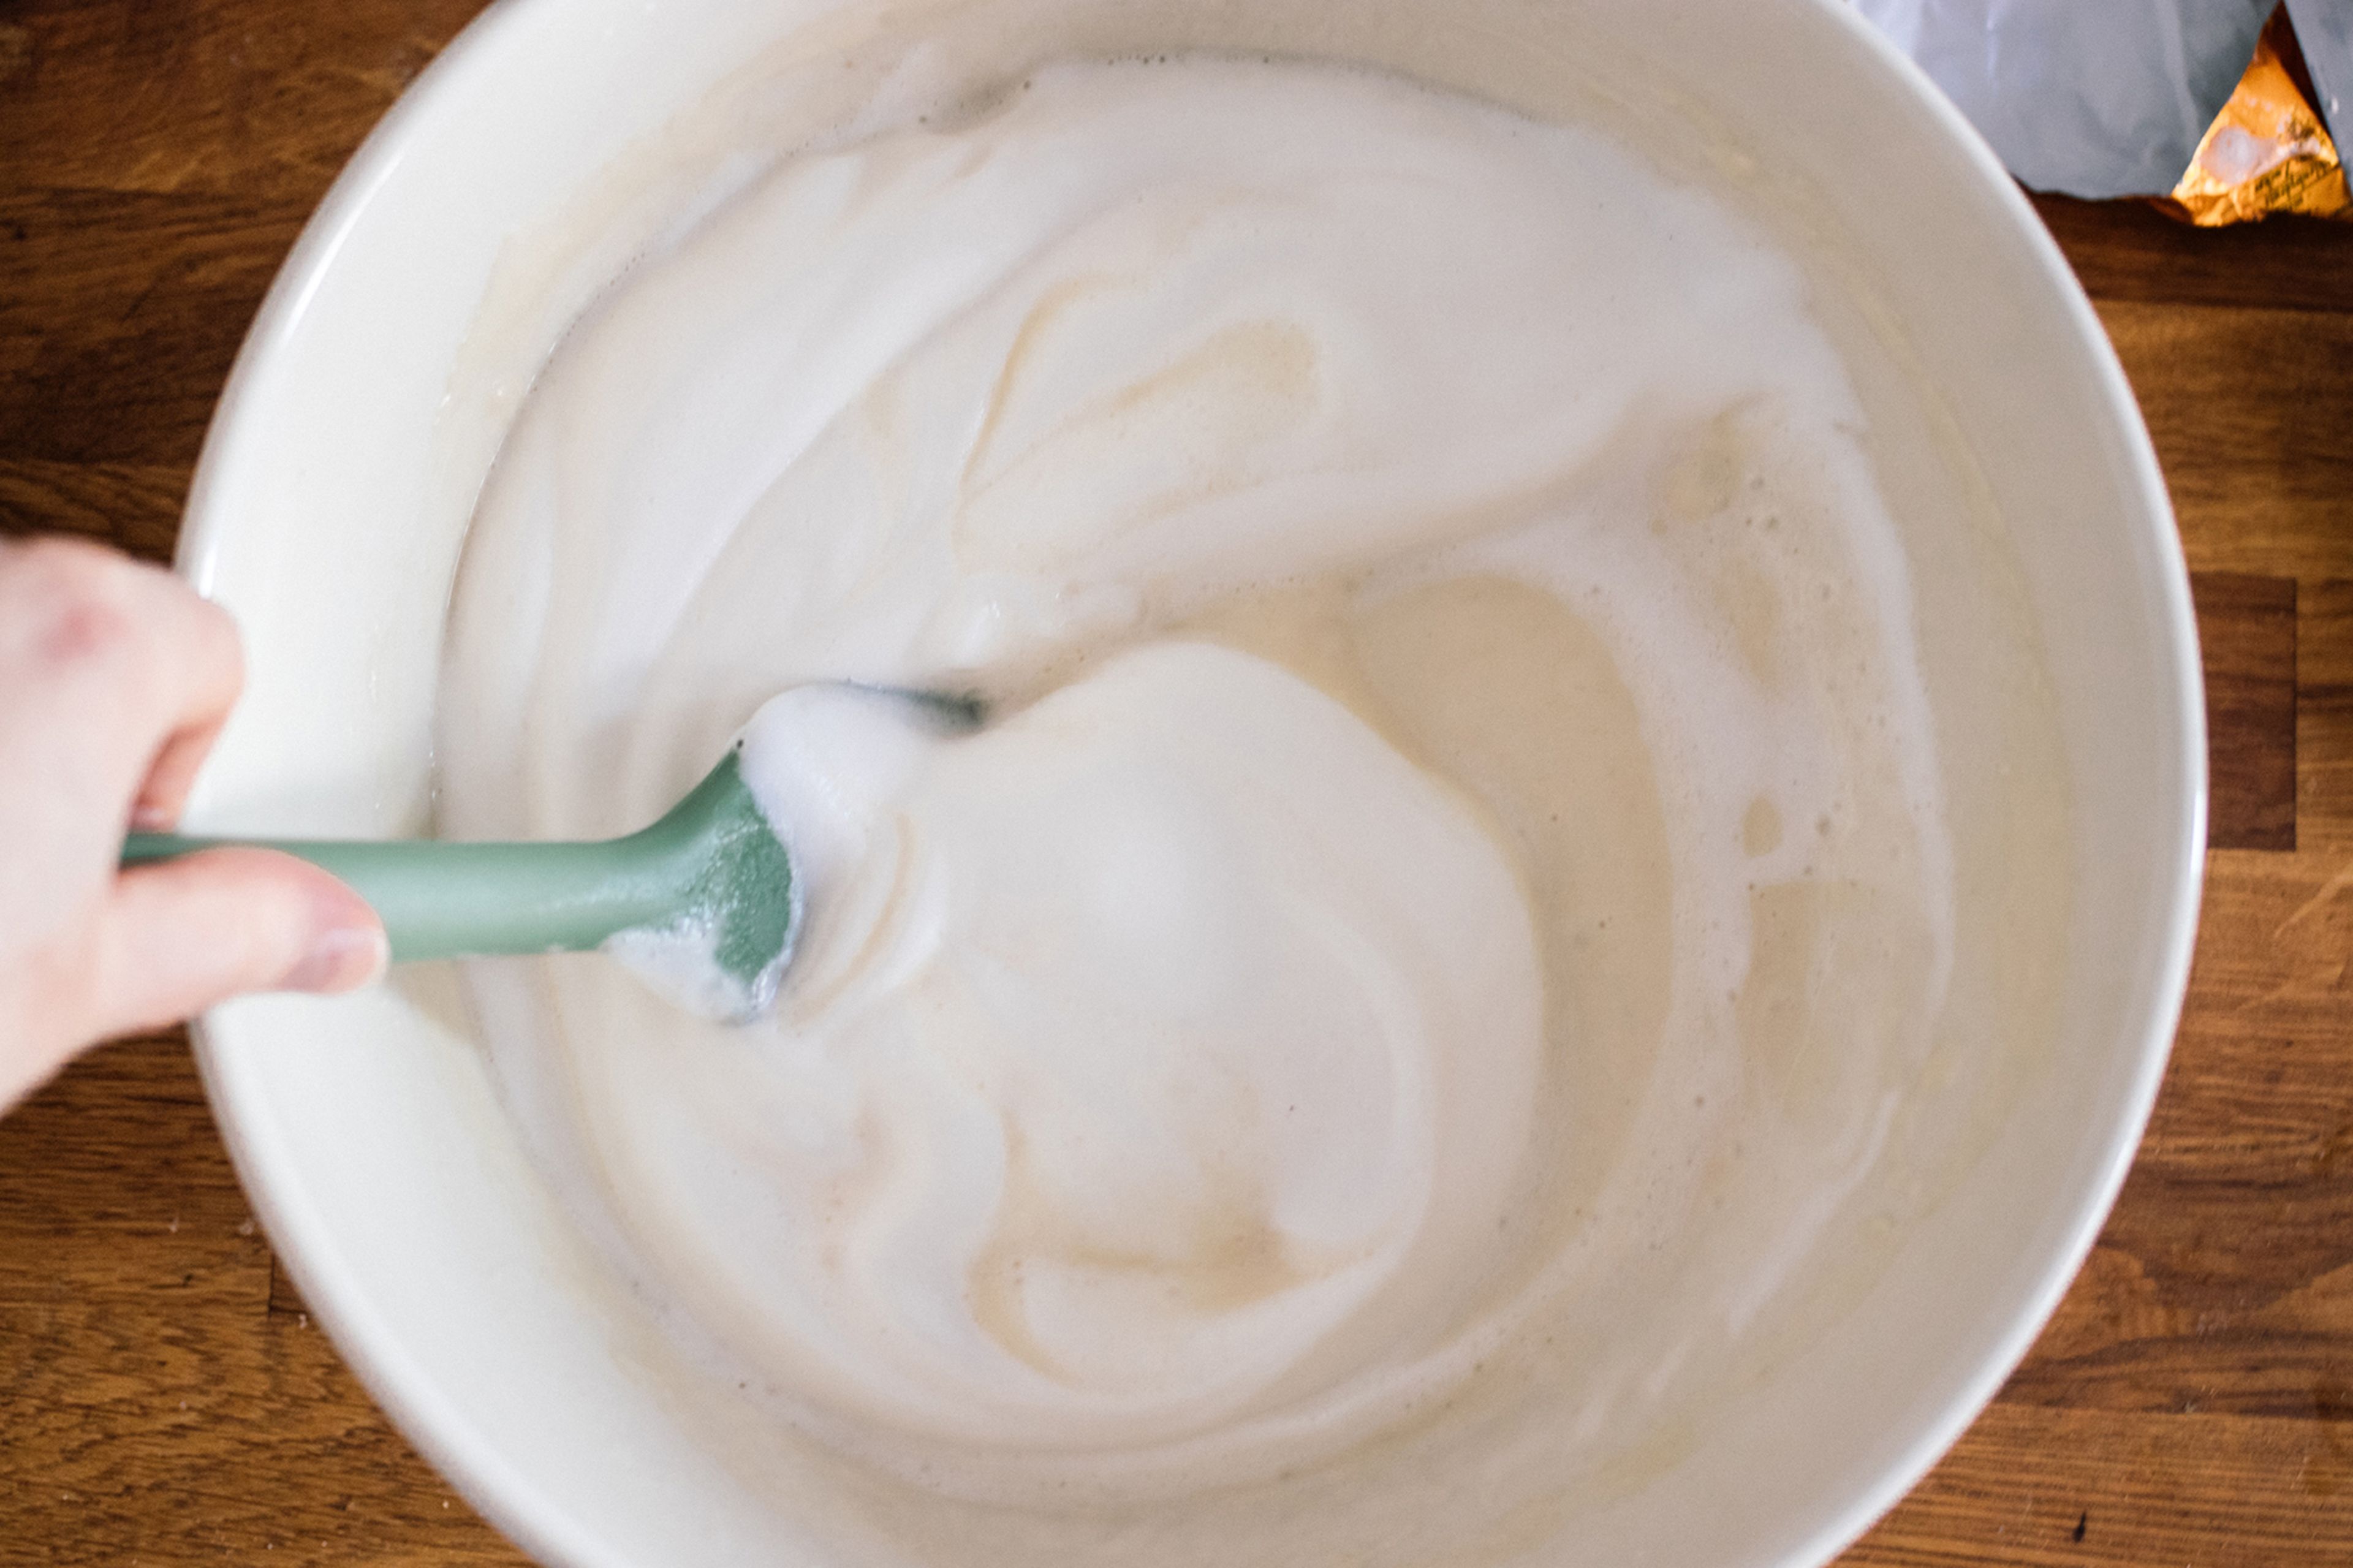 In another bowl, mix flour, sugar, and baking powder together. Add plant-based milk and melted margarine and stir until a smooth batter forms. Stir in sparkling water, then gently fold in the beaten aquafaba.